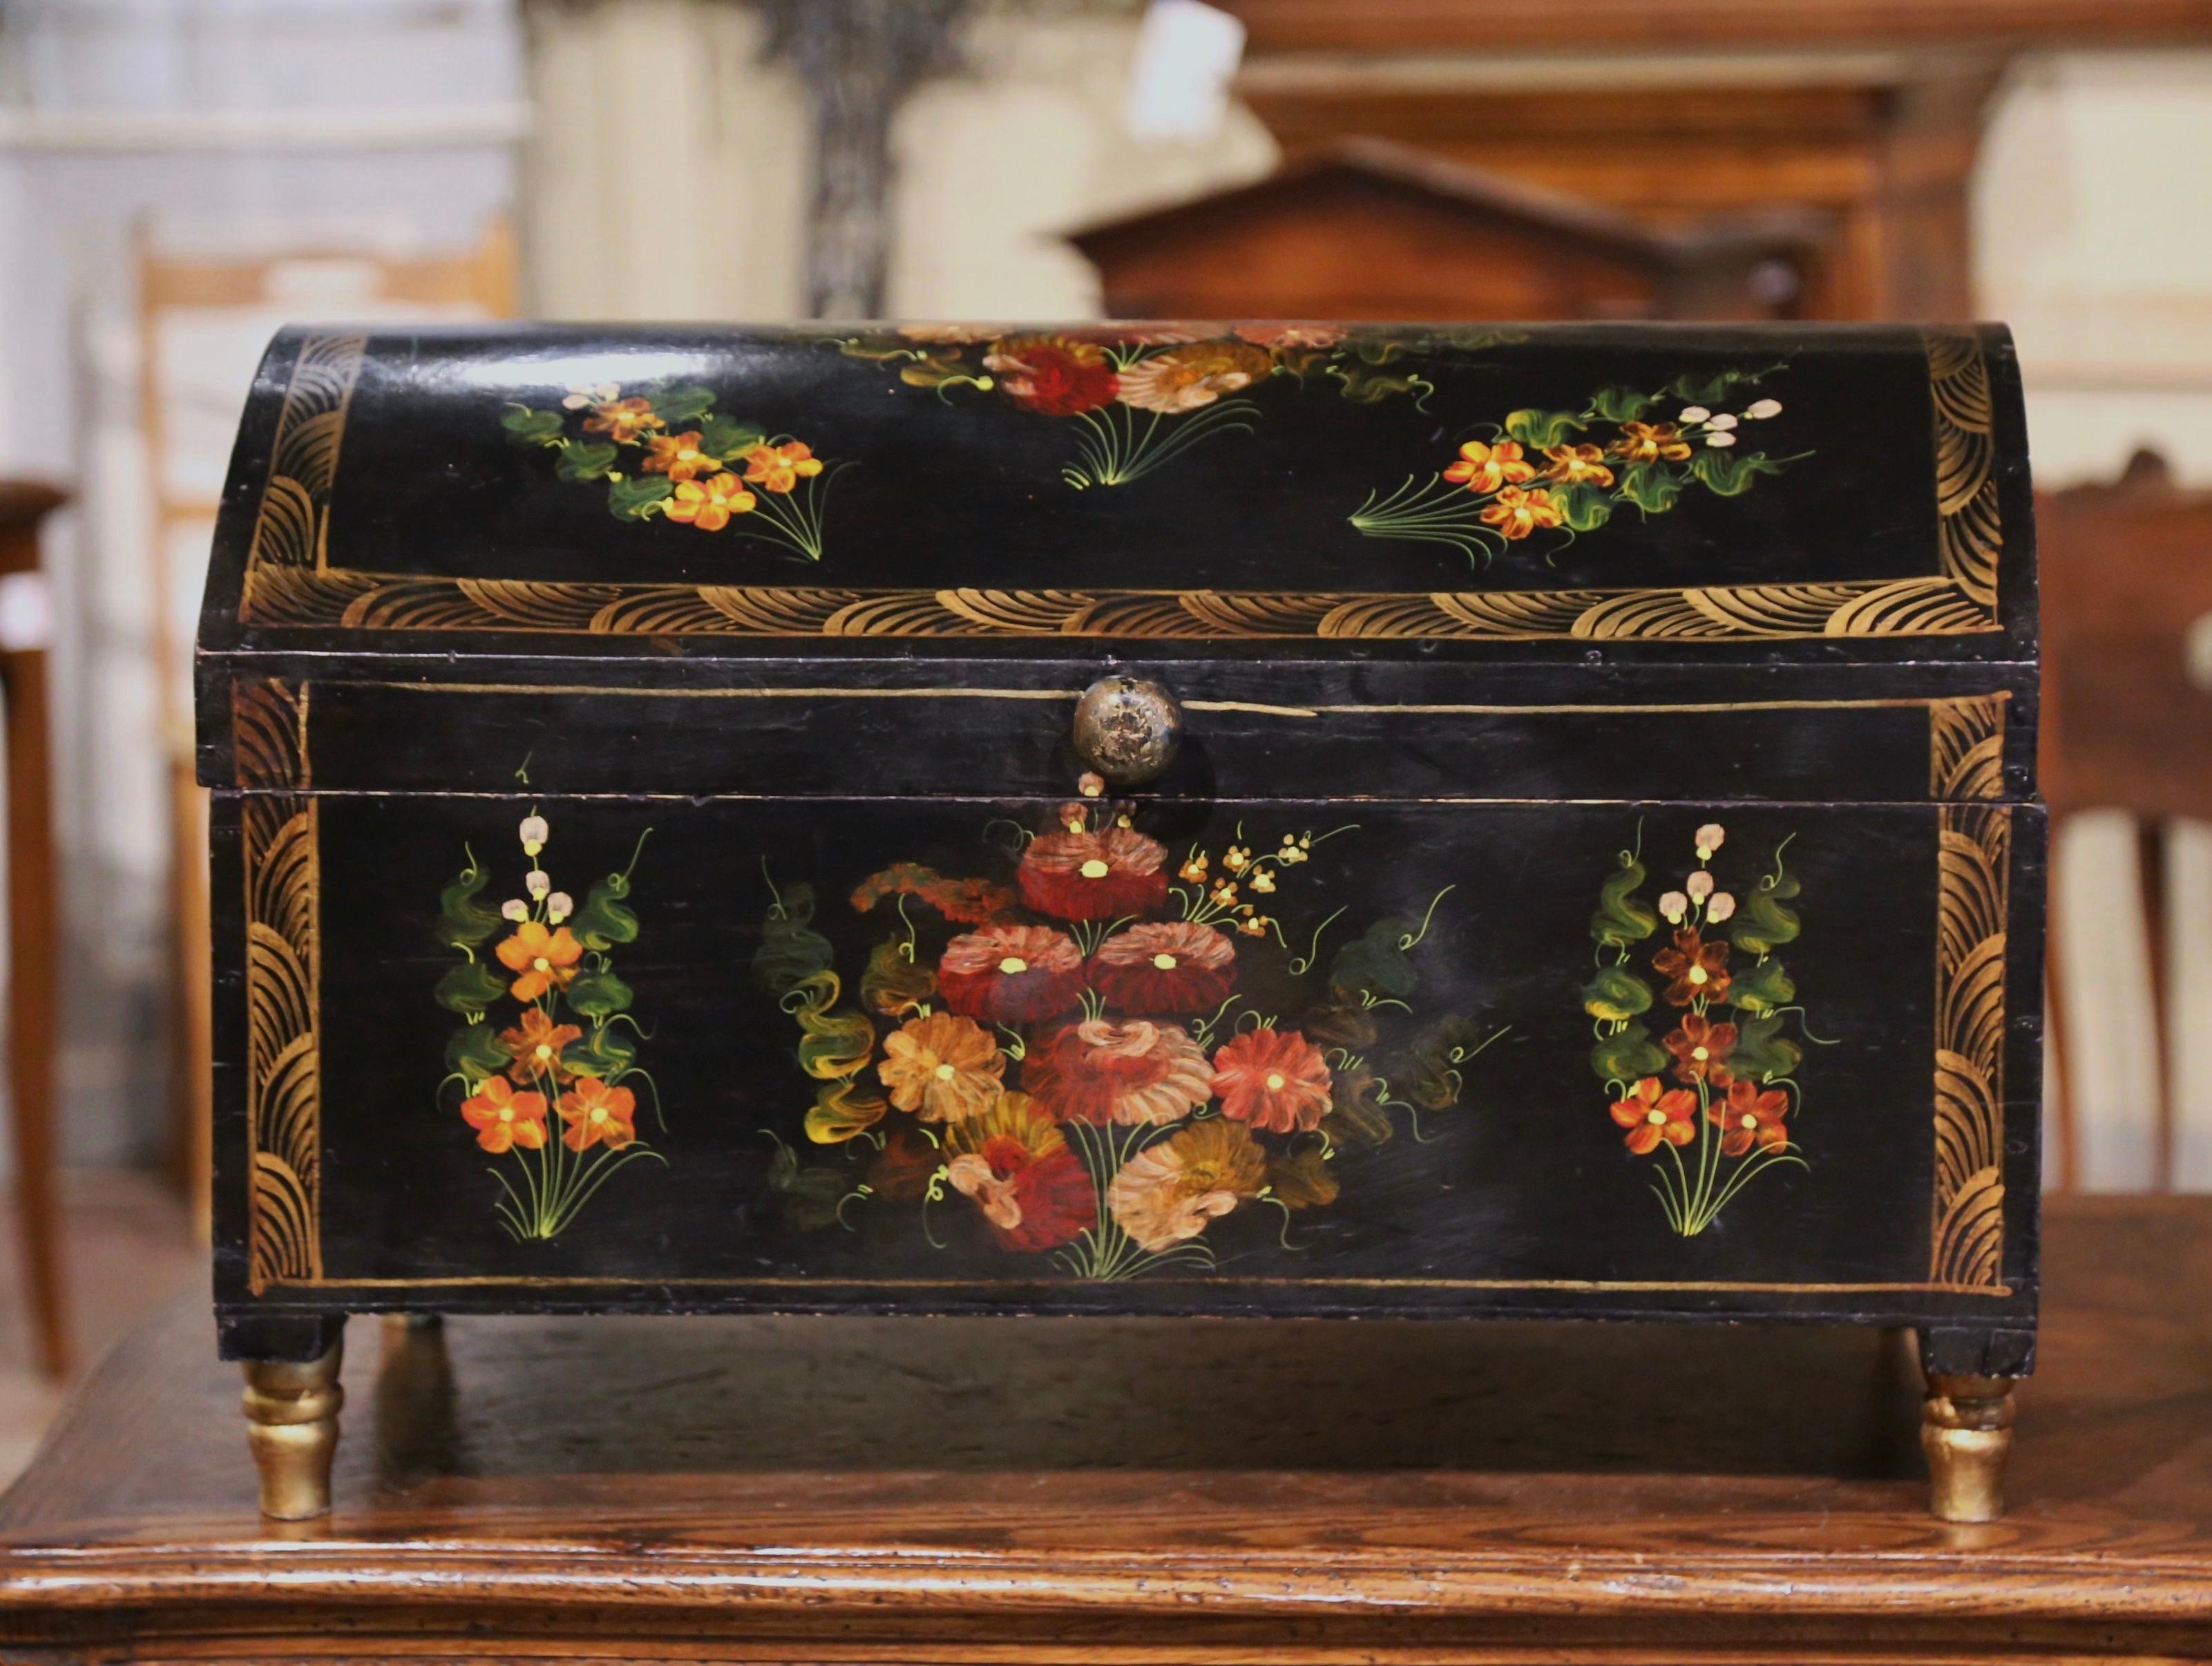 This beautifully executed antique wedding trunk was crafted in Spain, circa 1920. The colorful box with arched top, stands on small gilt painted turned legs, and is dressed with a wooden knob. The cabinet is decorated with hand painted floral and